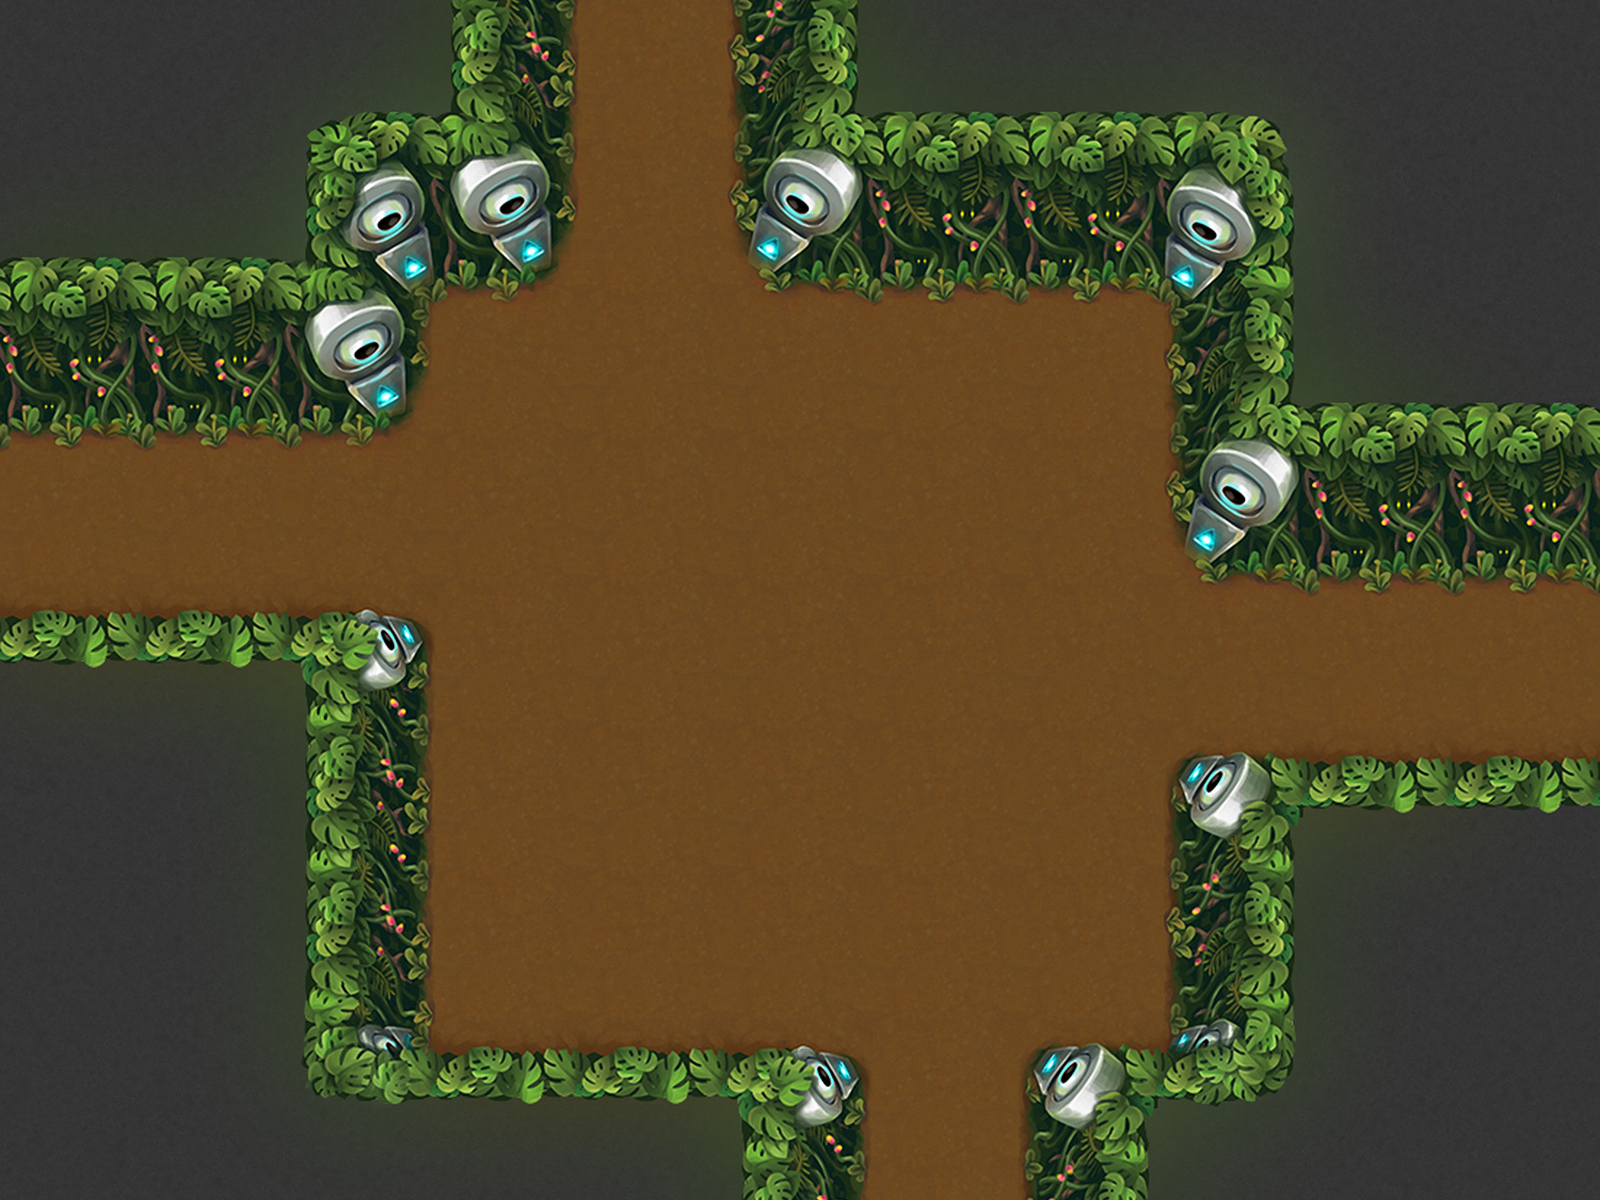 jungle-theme-dungeon-tileset-for-a-top-down-rpg-game-by-margarita